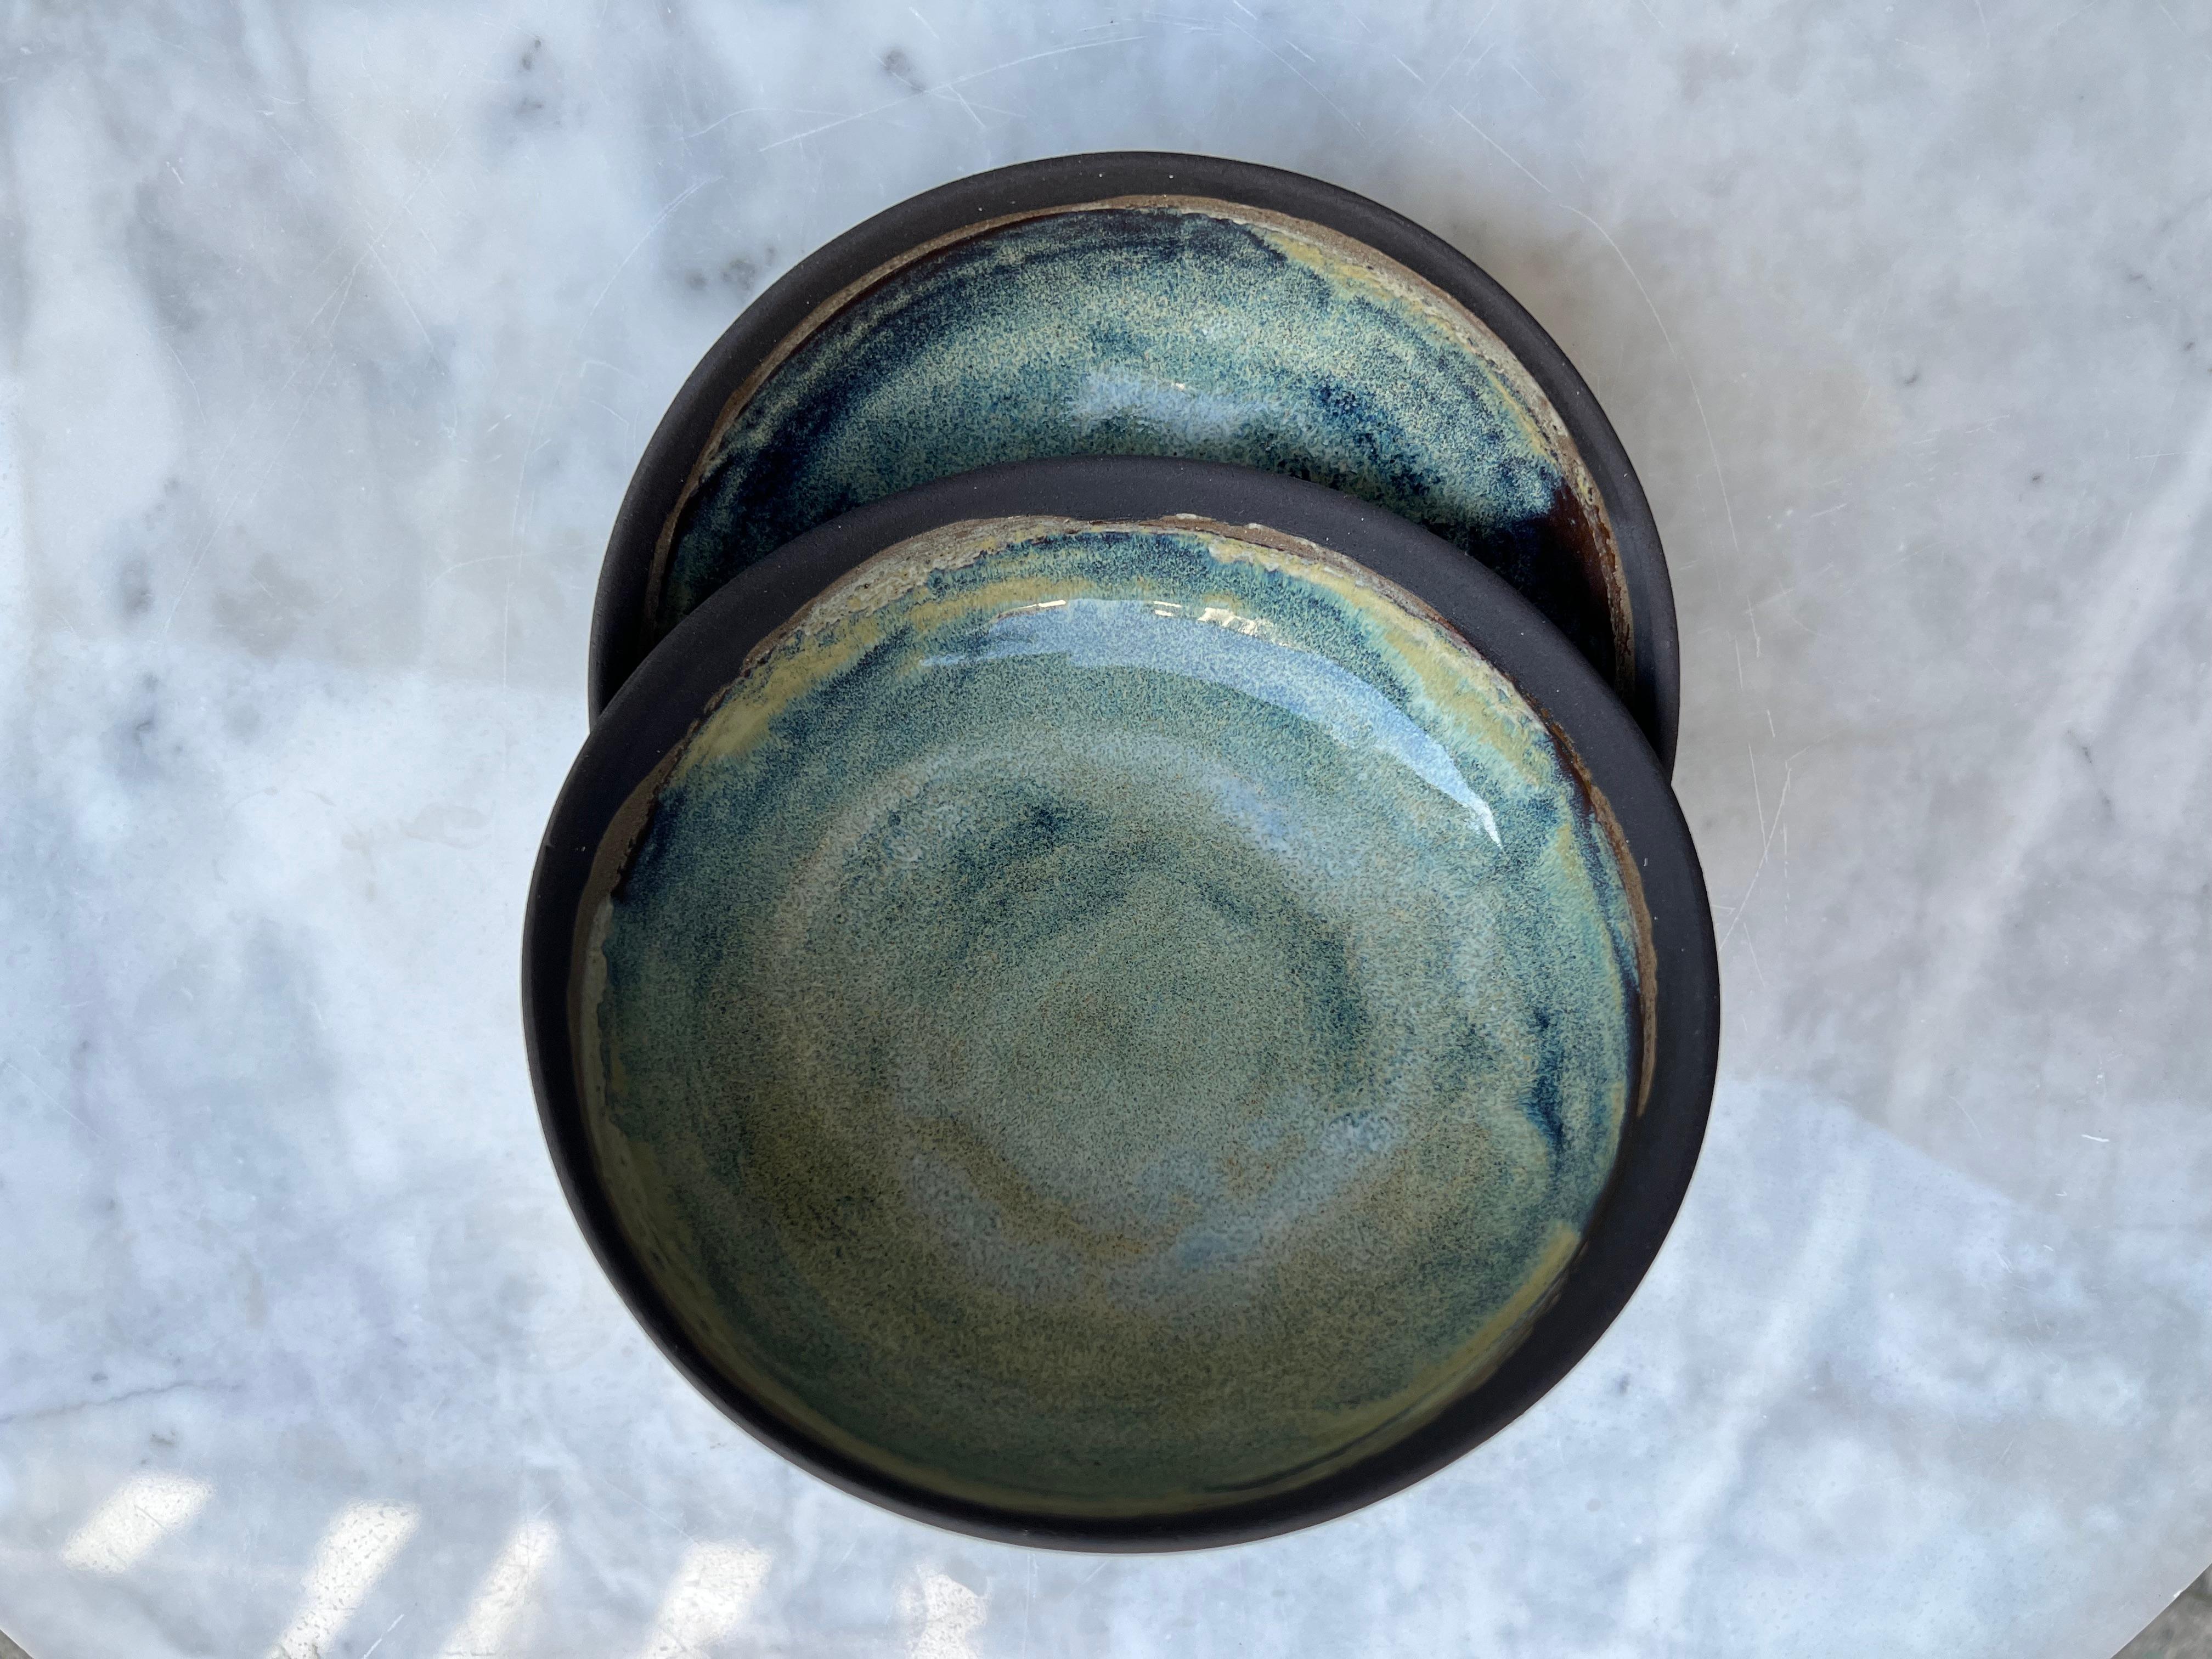 Set of 2 Turquoise Bowl by Güler Elçi
Dimensions: Small: D 15 x H 5 cm
Large: D 21 x H 5 cm
Materials: Stoneware Ceramic, Food Safe Glaze.

Güler Elçi is a ceramic artist based in Istanbul. In the light of her engineering career, she considers